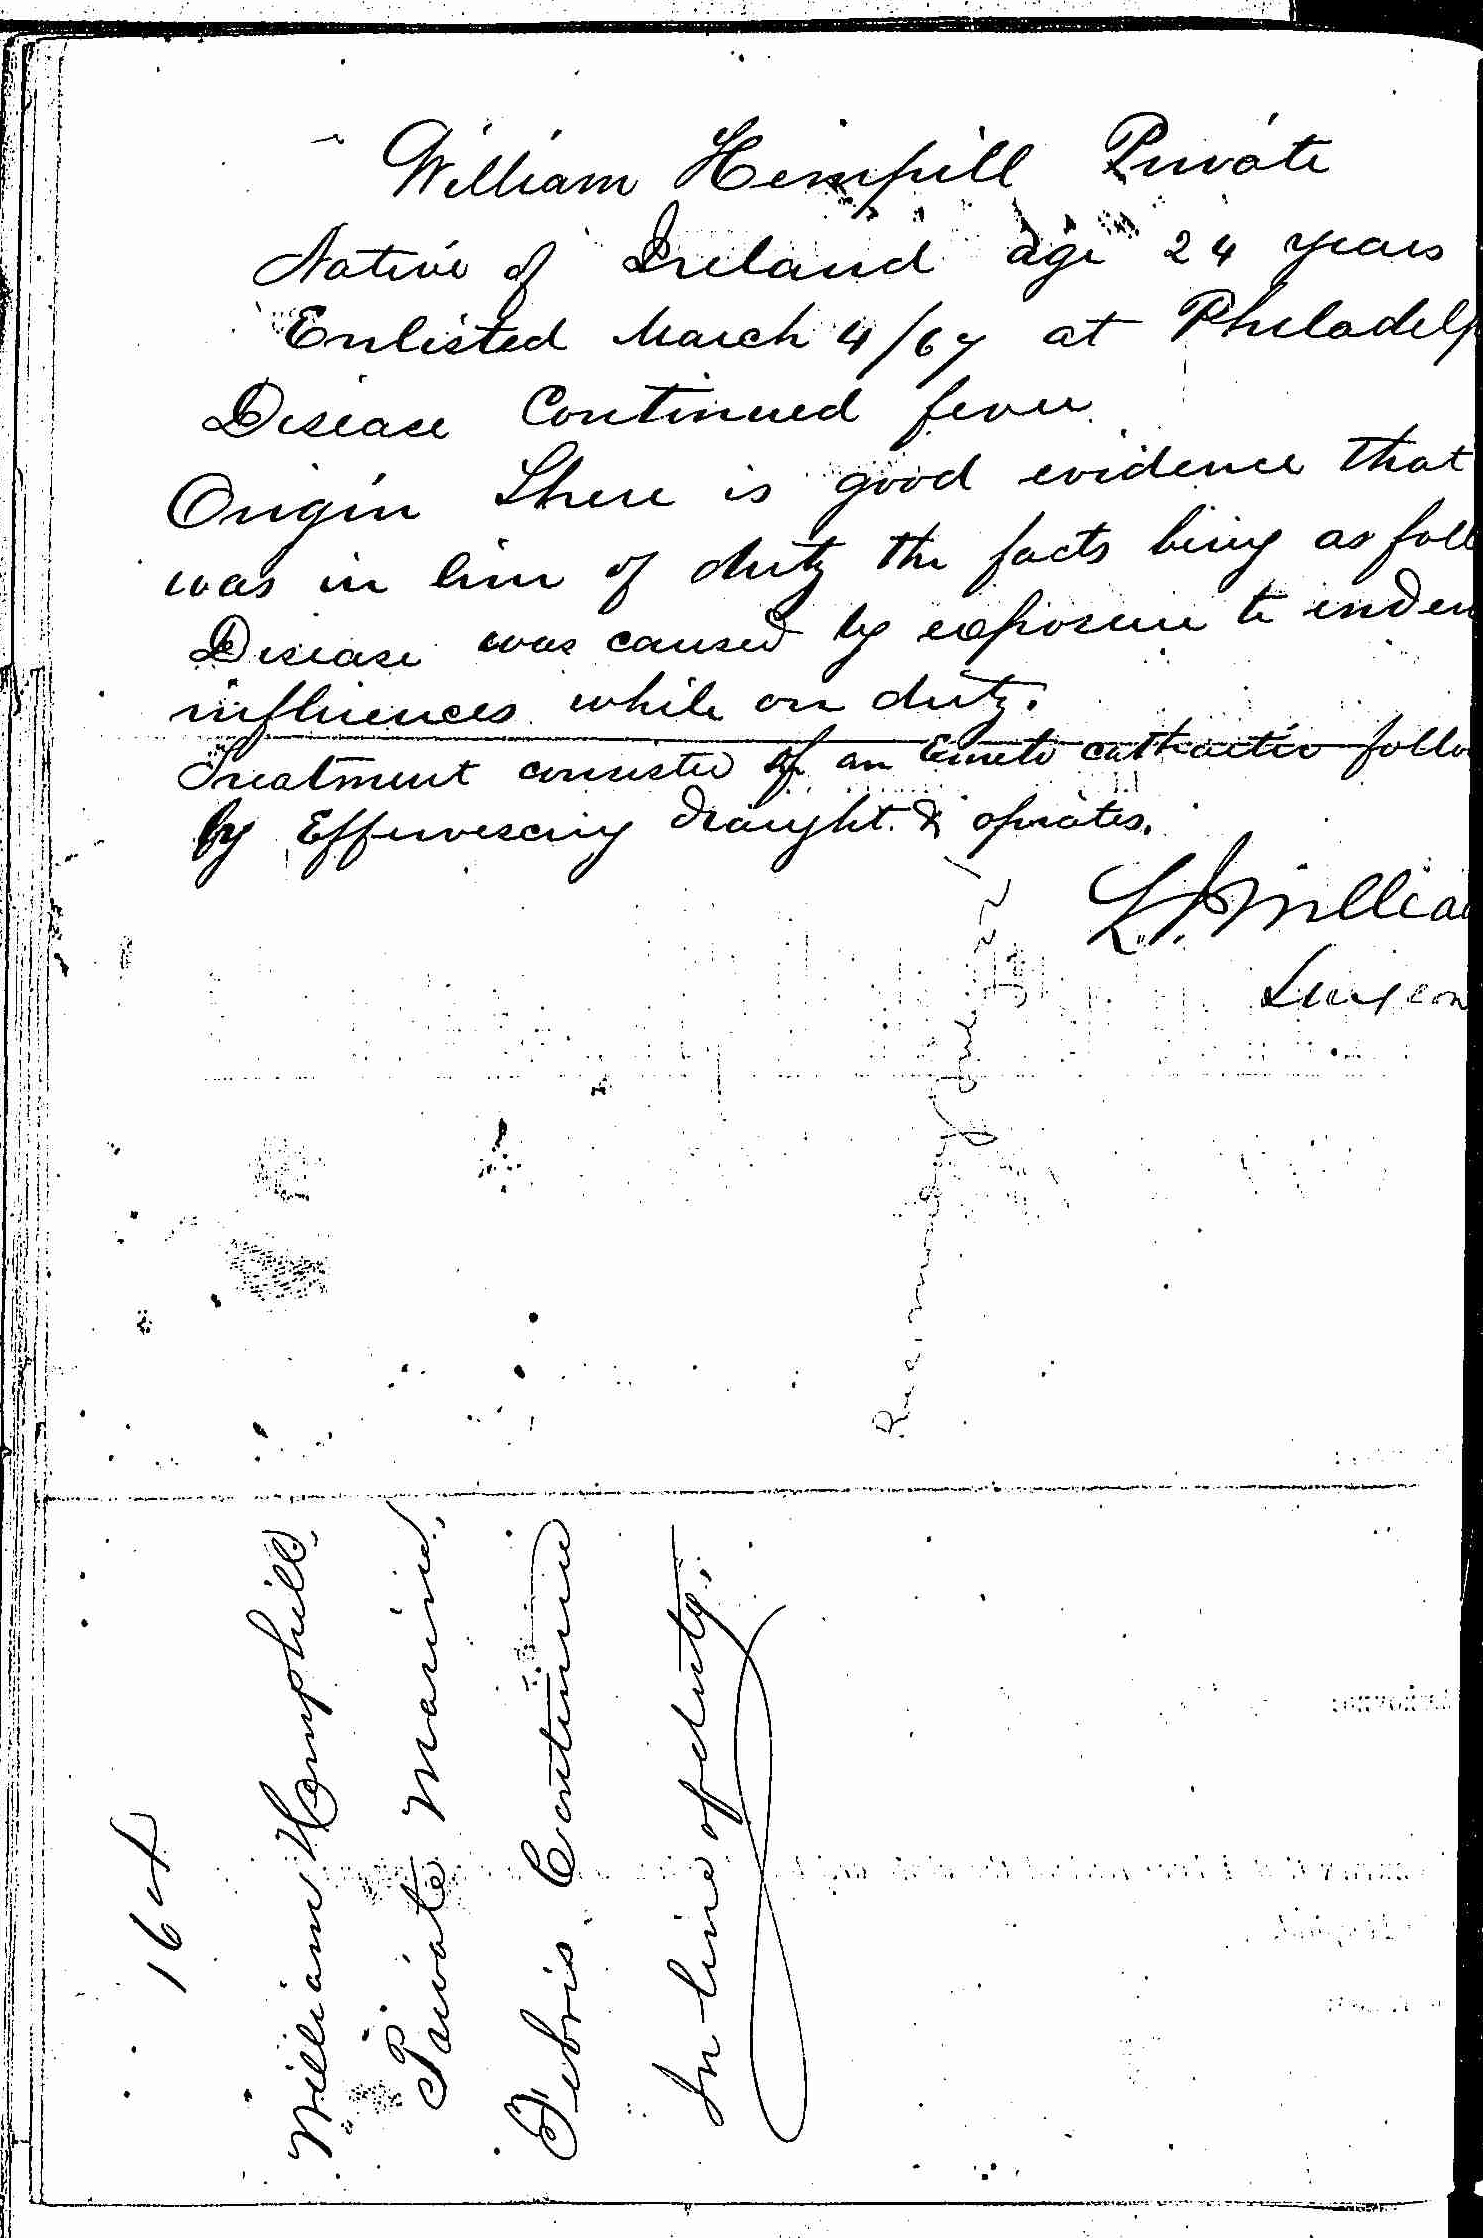 Entry for William Hempill (first admission page 2 of 2) in the log Hospital Tickets and Case Papers - Naval Hospital - Washington, D.C. - 1866-68